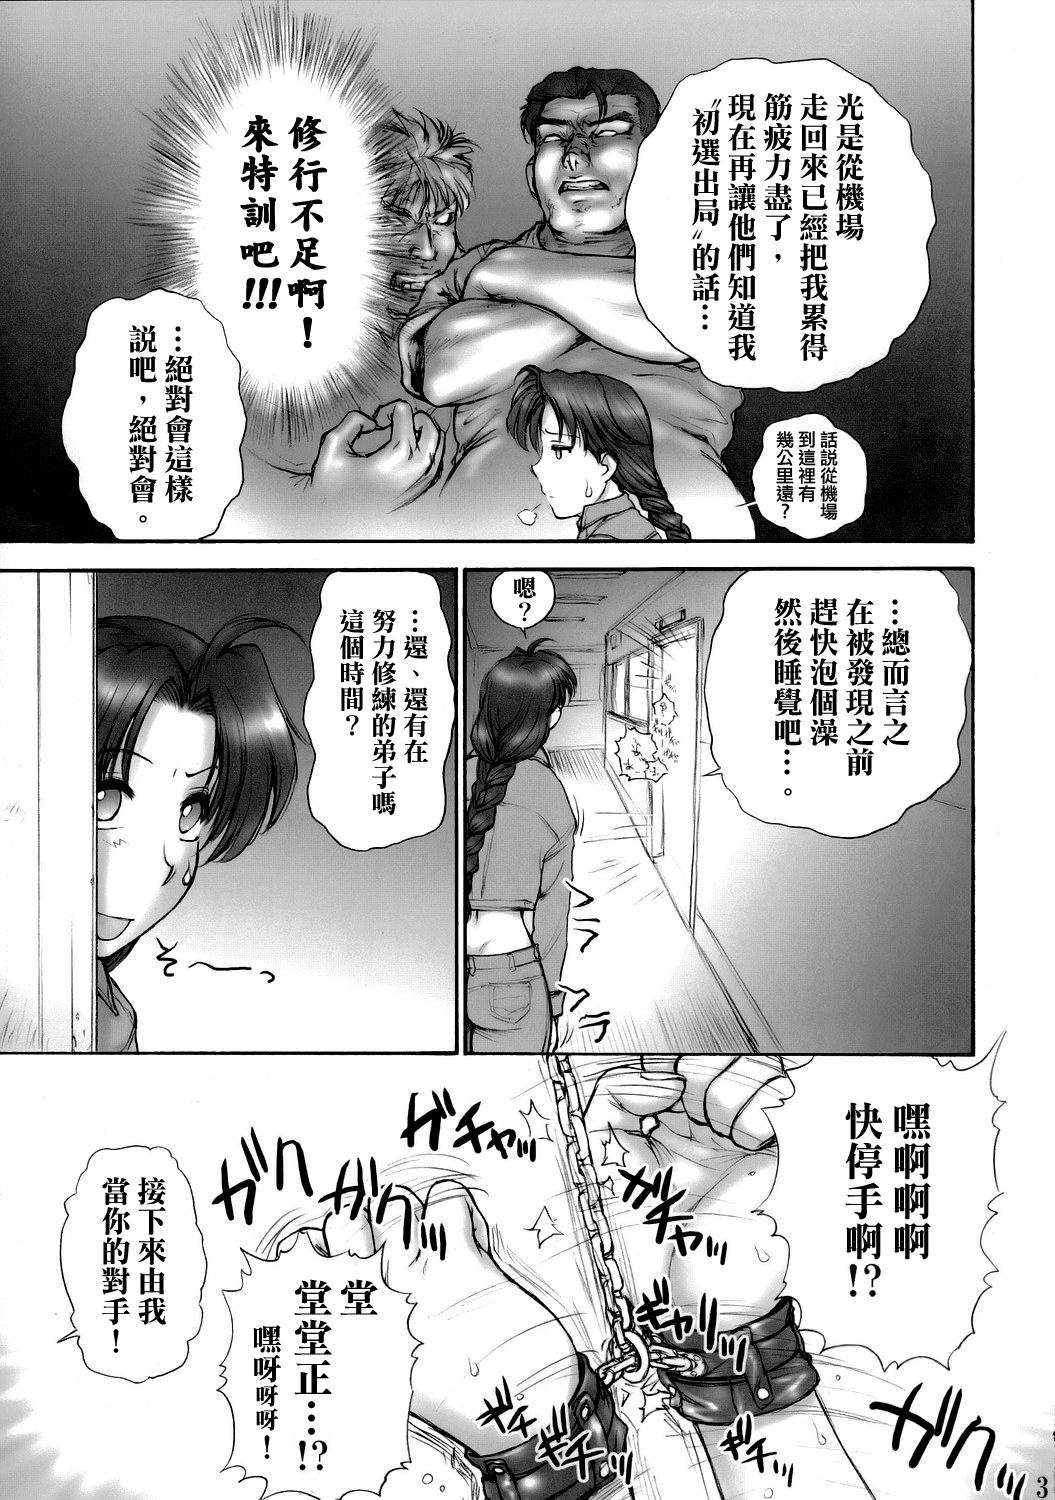 Amazing (SC29) [Shinnihon Pepsitou (St. Germain-sal)] Report Concerning Kyoku-gen-ryuu (The King of Fighters) [Chinese] [日祈漢化] - King of fighters Asiansex - Page 5